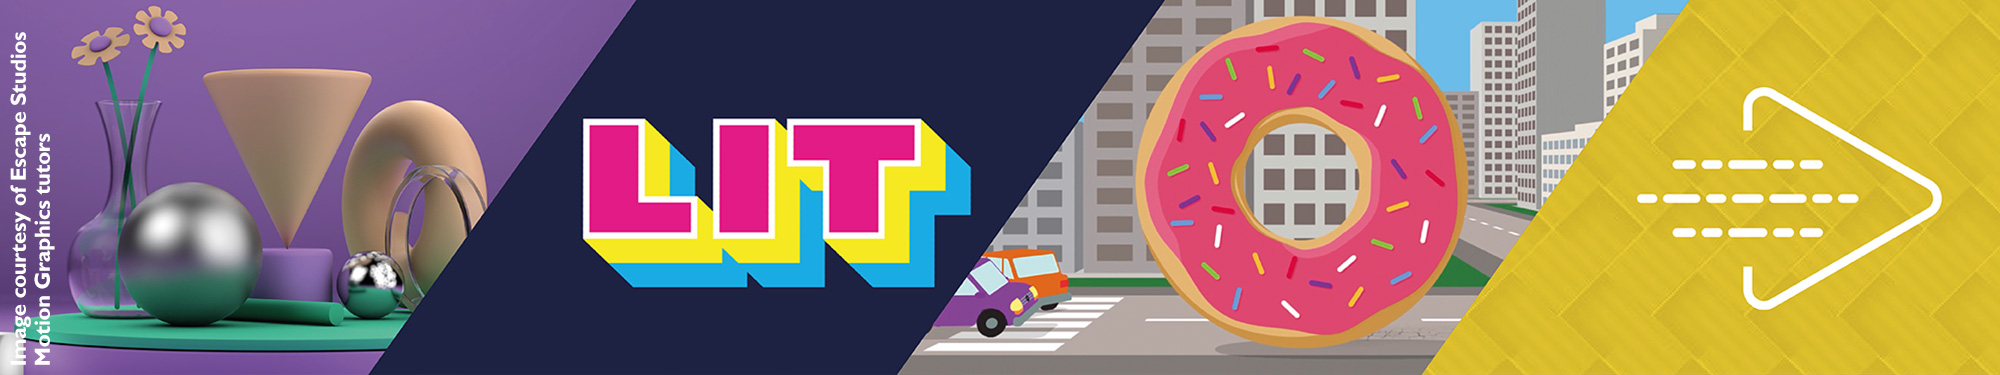 Mosaic of four motion graphics images including geometric shapes, the letters LIT in neon colours, a big pink doughnut on a road, and a white arrow icon on a yellow background